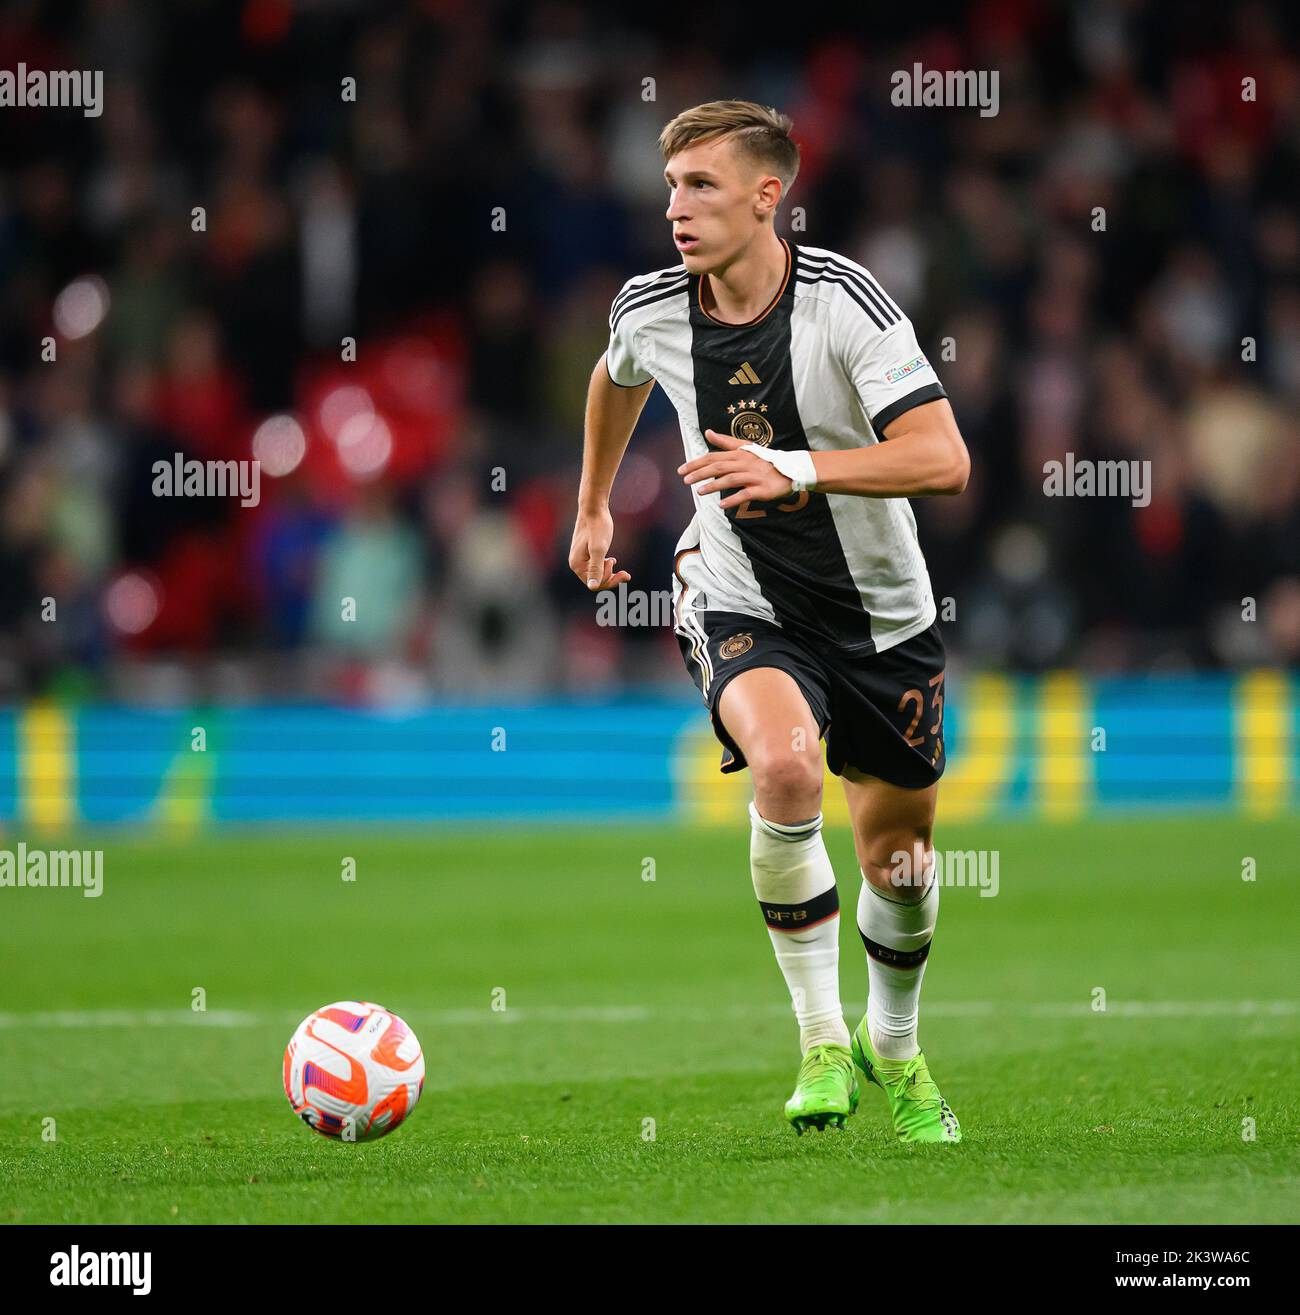 26 Sep 2022 - England v Germany - UEFA Nations League - League A - Group 3 - Wembley Stadium  Germany's Nico Schlotterbeck during the UEFA Nations League match against England. Picture : Mark Pain / Alamy Live News Stock Photo